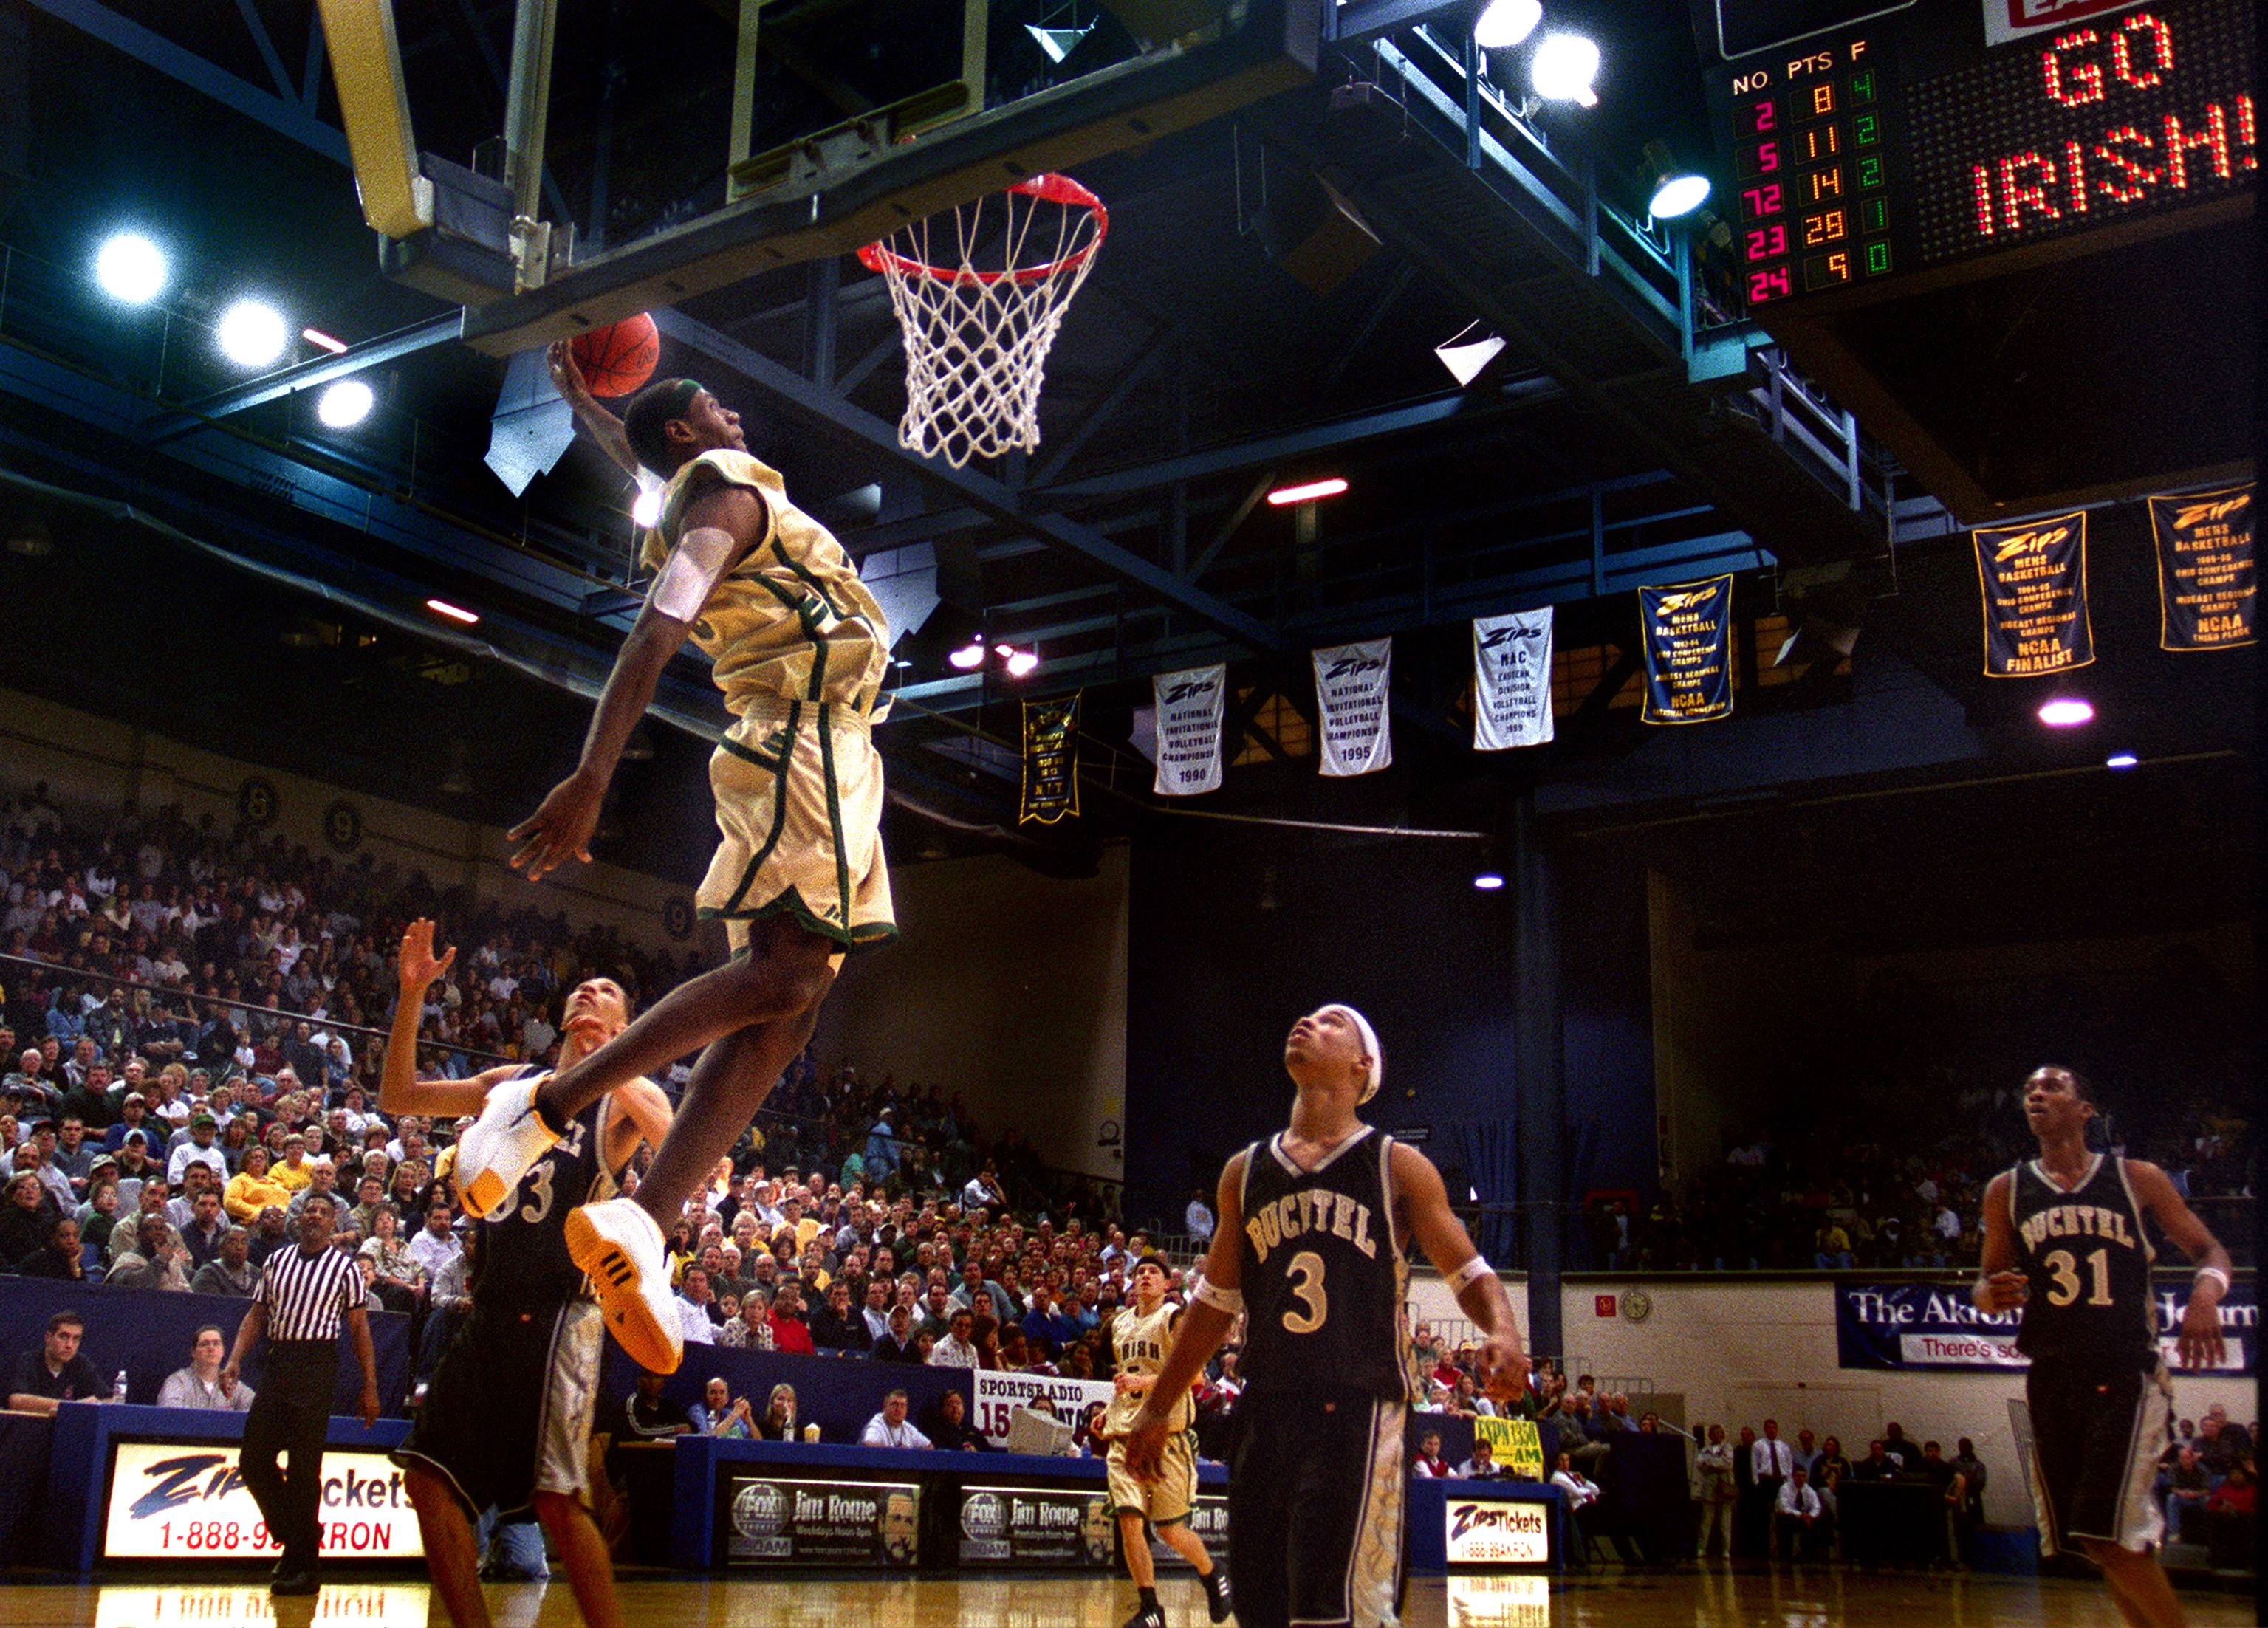 Akron Saint Vincent Saint Mary 's LeBron James goes up for a dunk in fourth quarter of action during Saint Vincent Saint Mary's rout of Akron Buchtel this afternoon at the James A. Rhodes Arena at the University of Akron.  Sunday January 27, 2002  (Chris Stephens/The Plain Dealer)